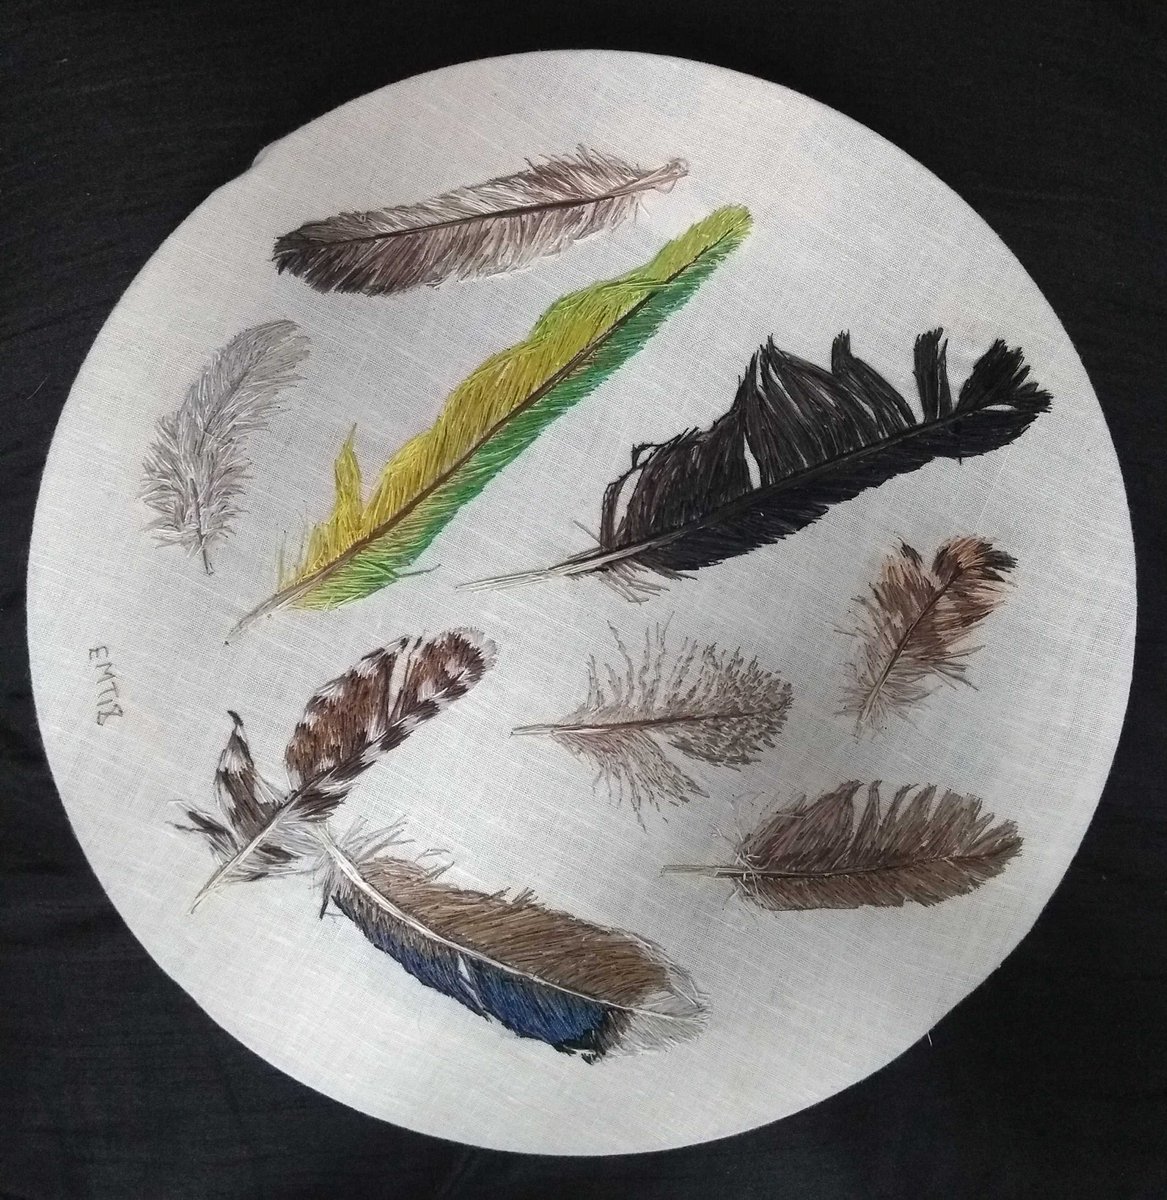 Feather Collection 1
thread painting artwork - all feathers are created with hand embroidery only.
emilytull.co.uk/store/p17/feat…
#HandmadeHour